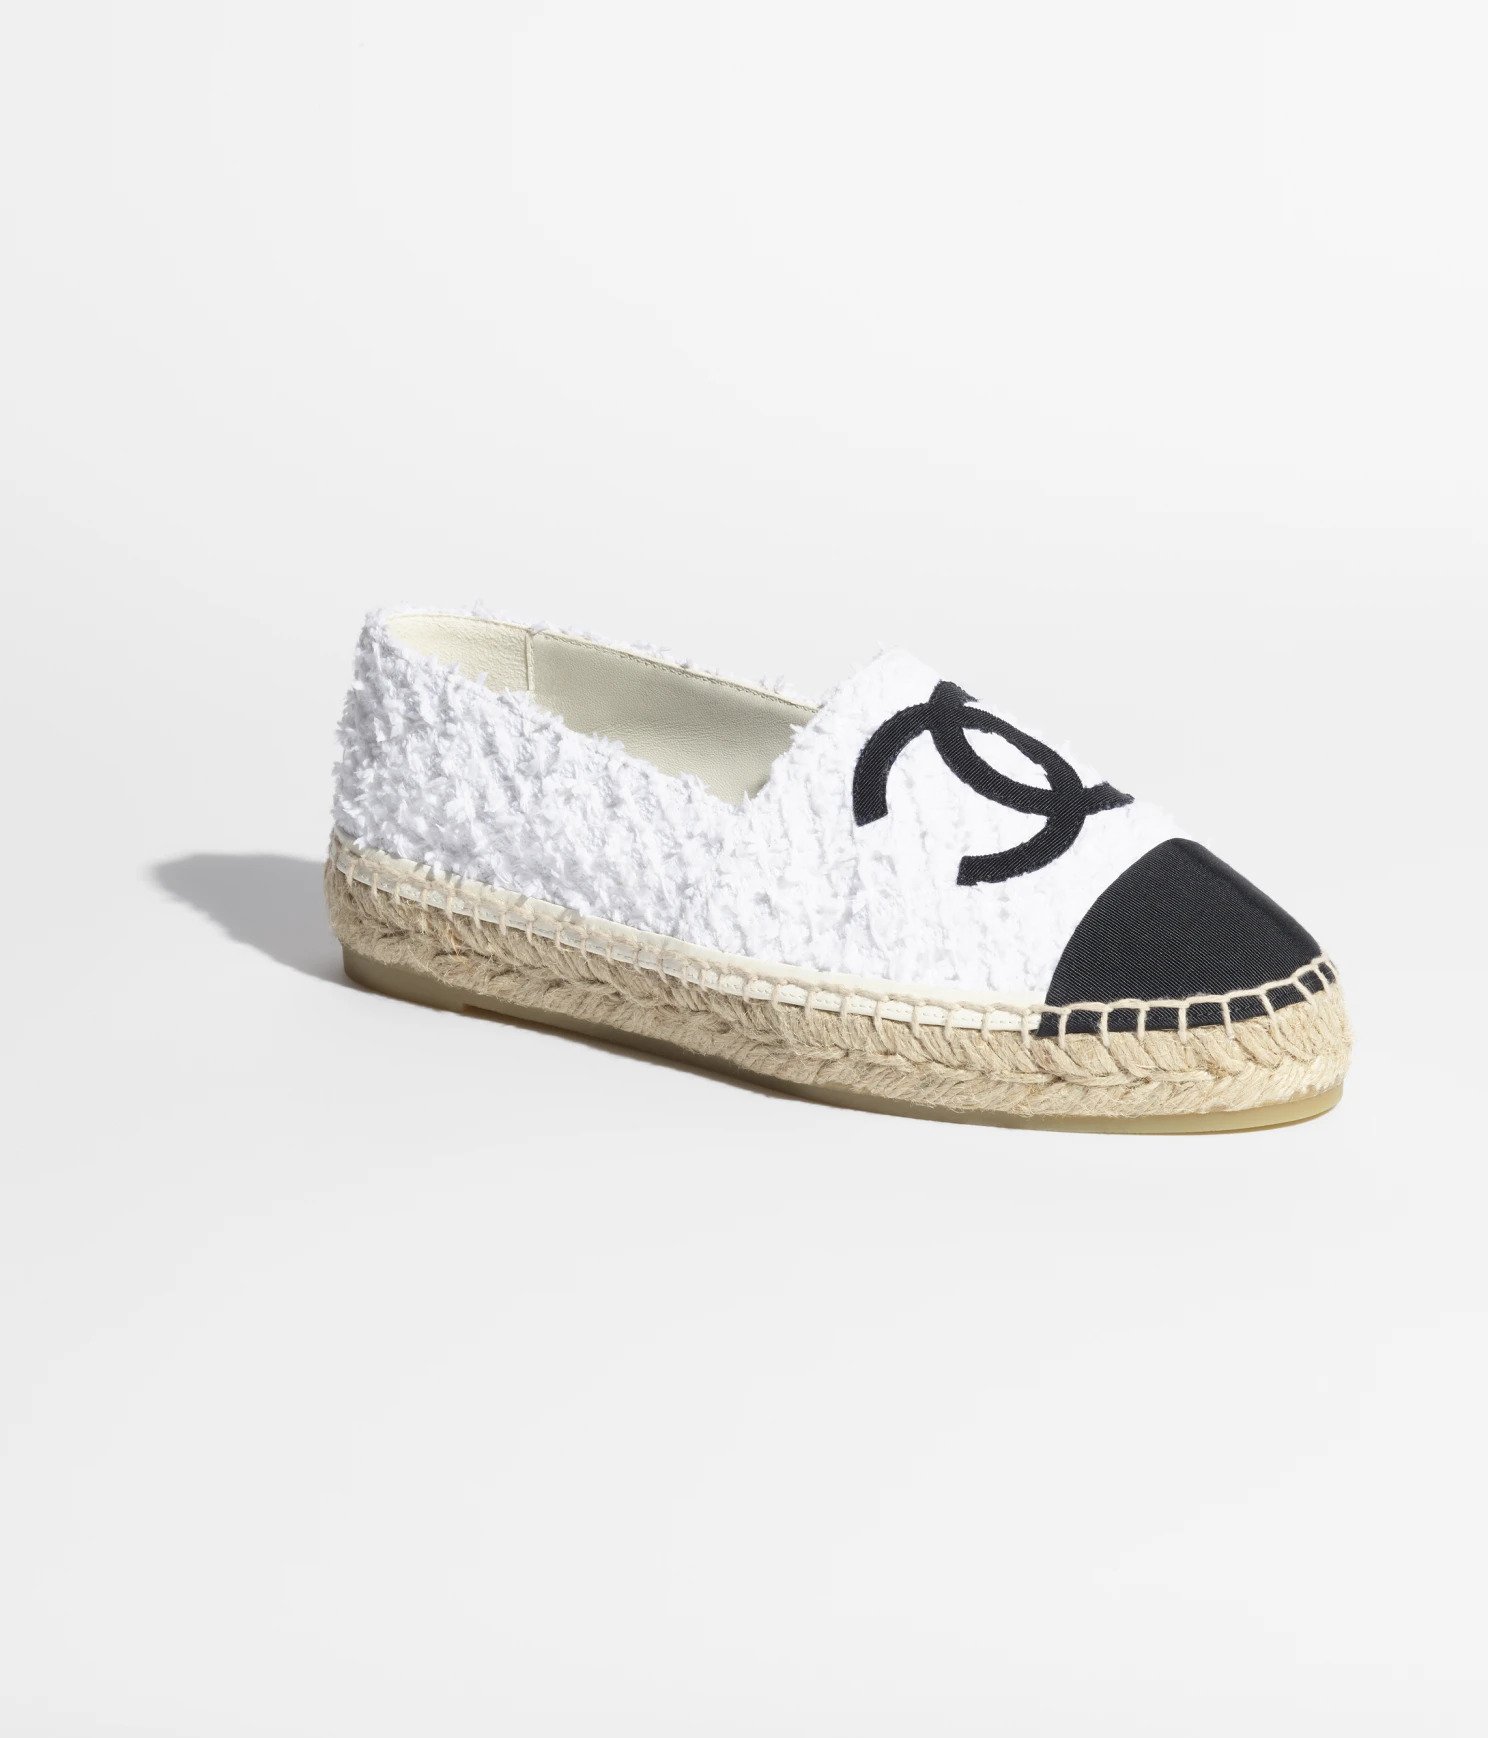 Chanel Espadrilles3 copy  The Girl from Panama